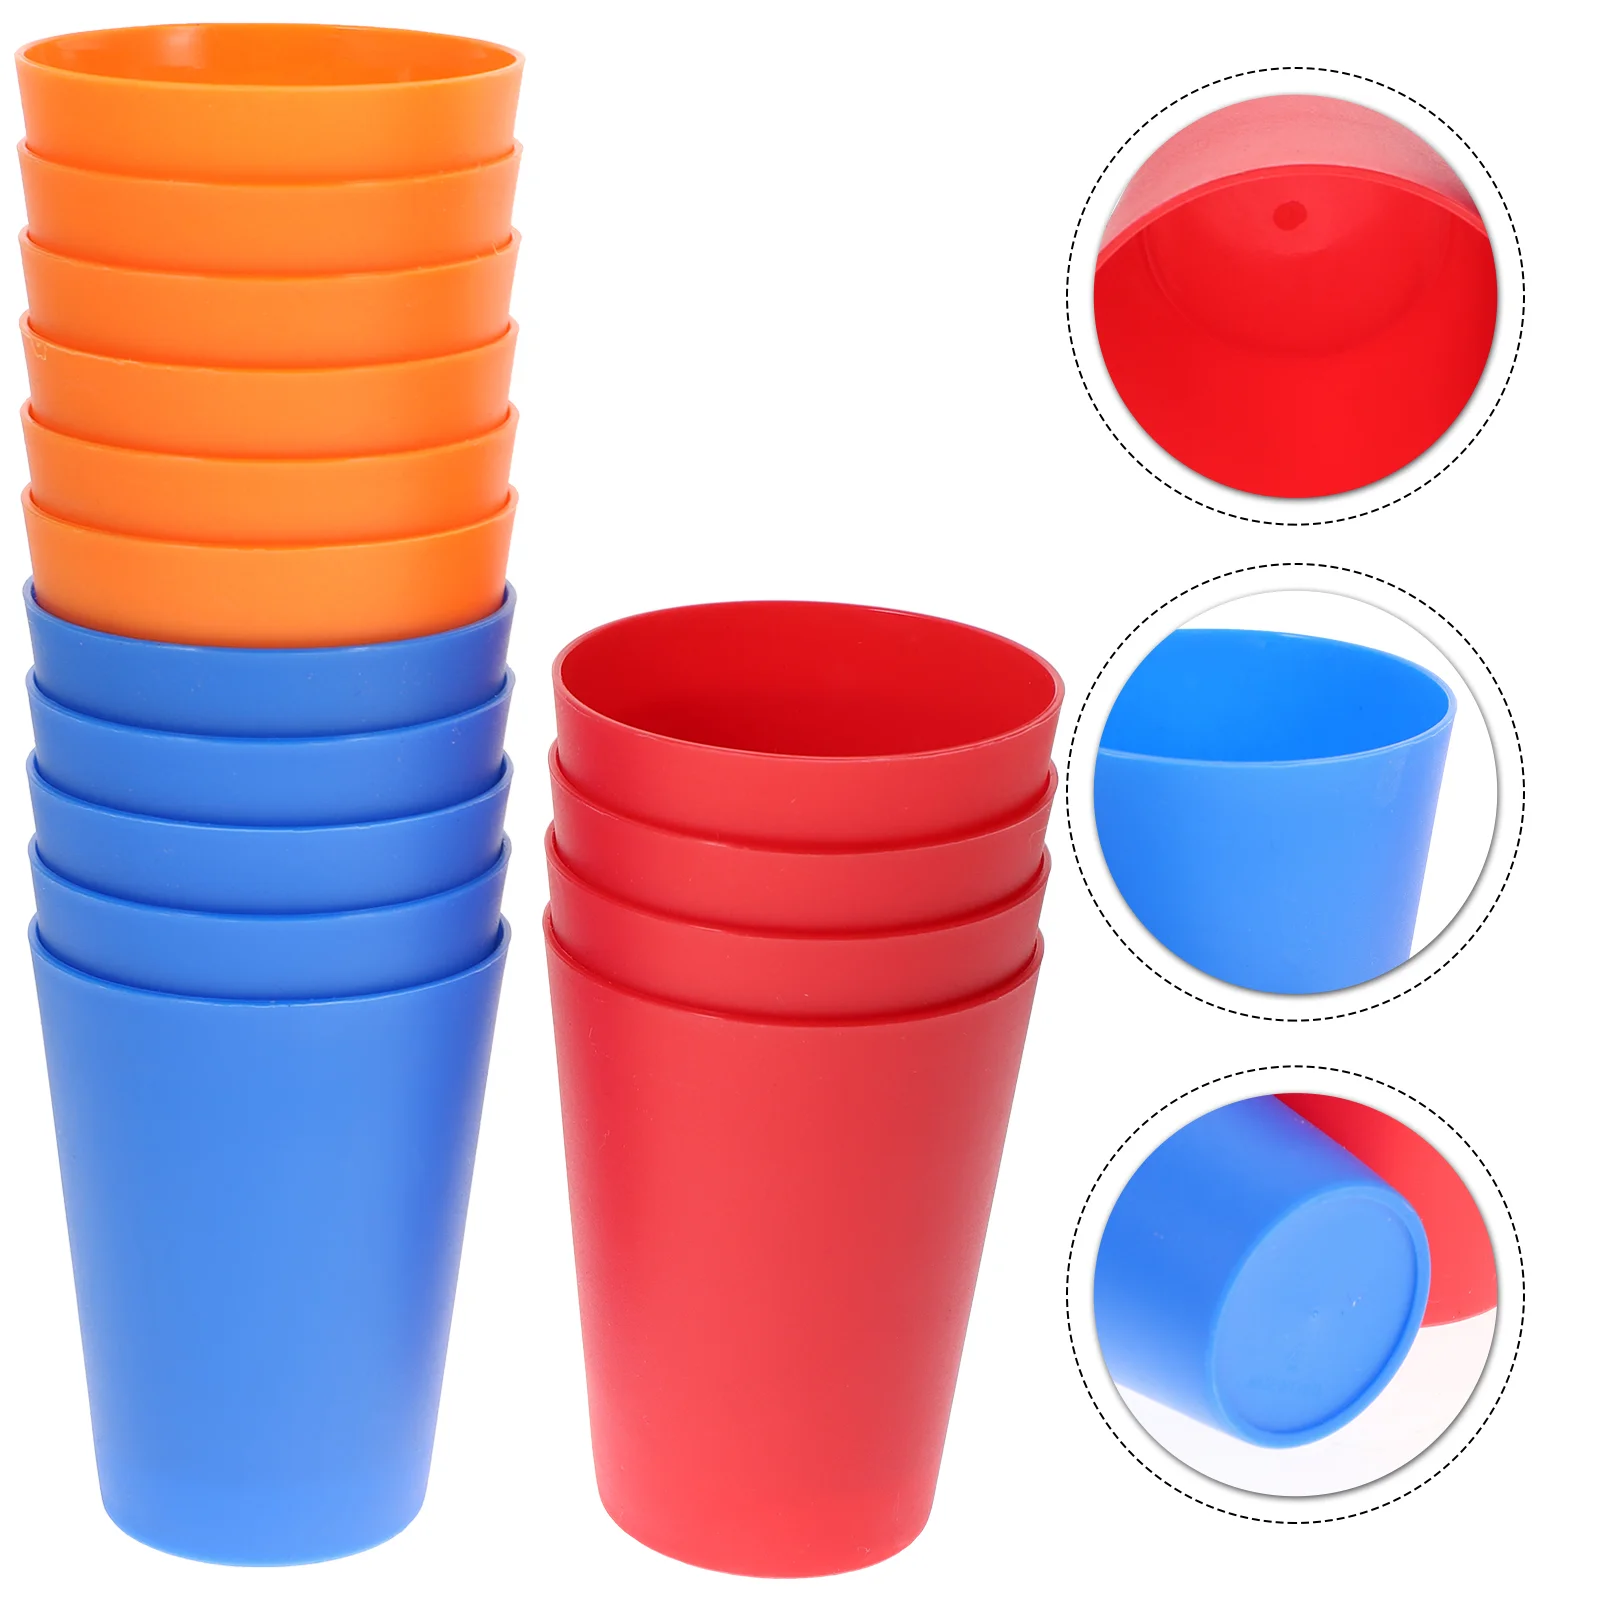 

15pcs Colorful Plastic Cups Home Beverage Drinking Cup Reusable Holiday Party Tableware and Party Supplies 101-200ml (Mixed For